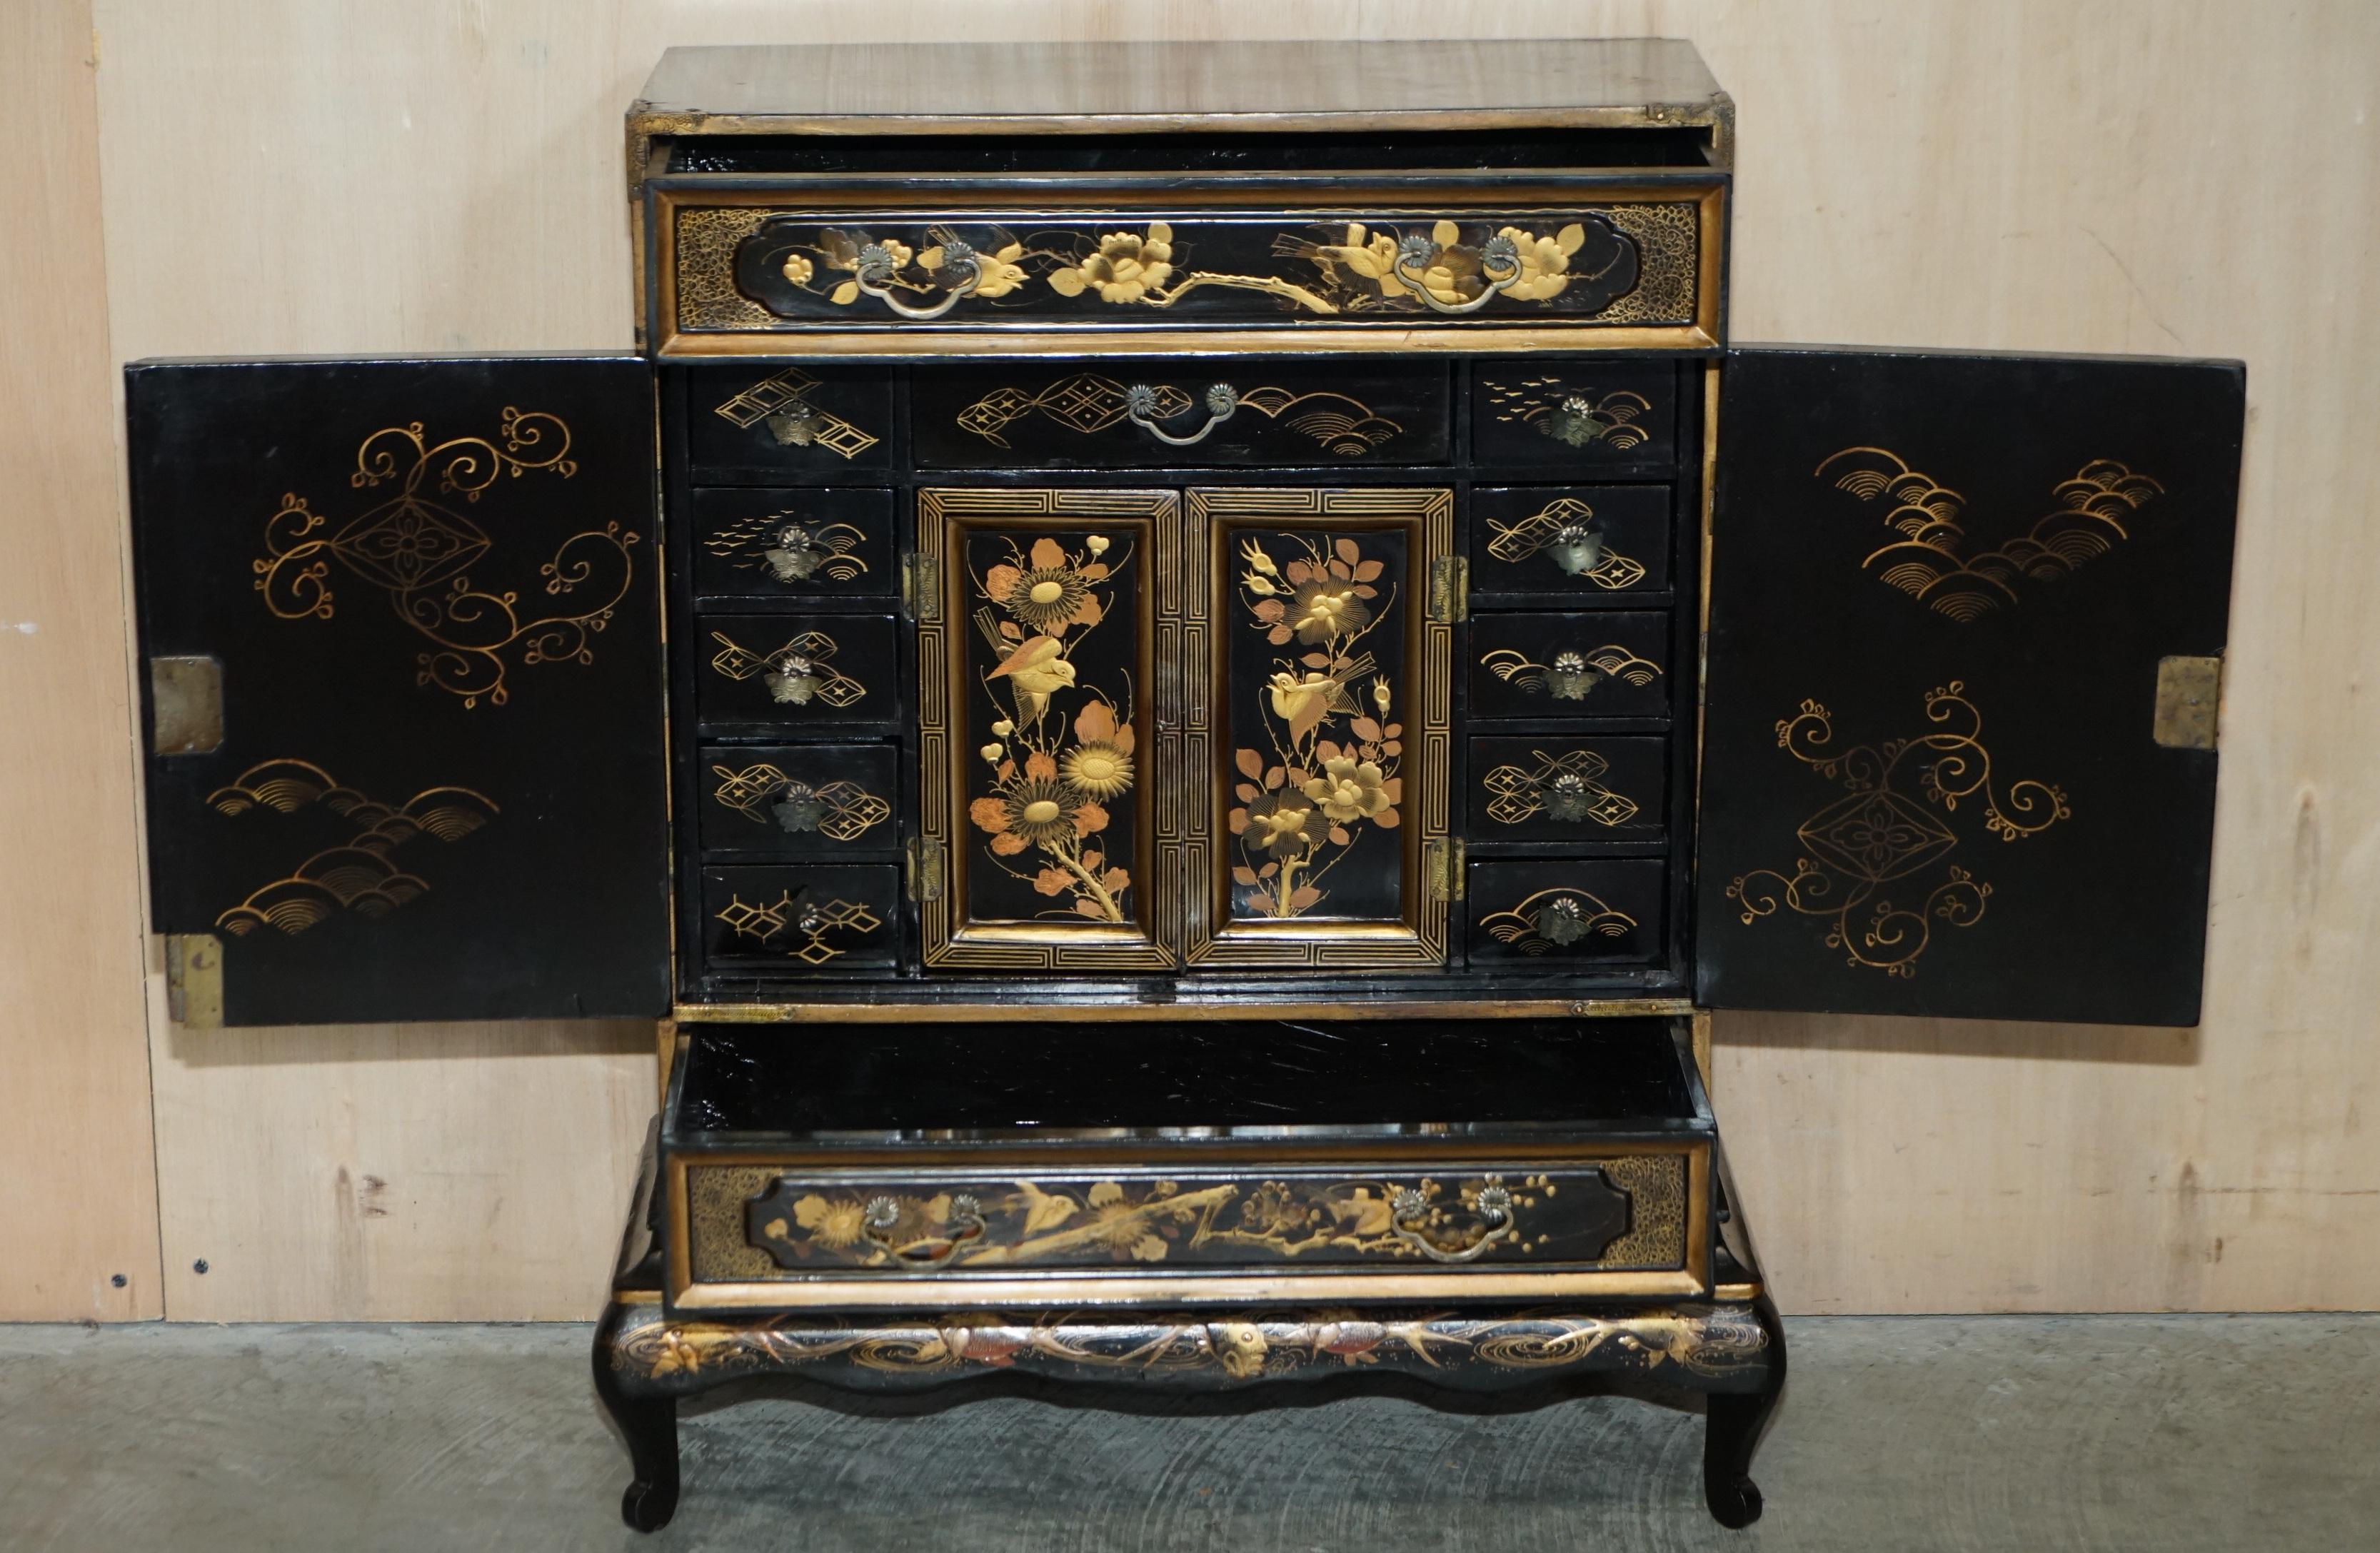 Rare Oriental Chinese Export Antique Cabinet Lots of Drawers for Fine Teas 10